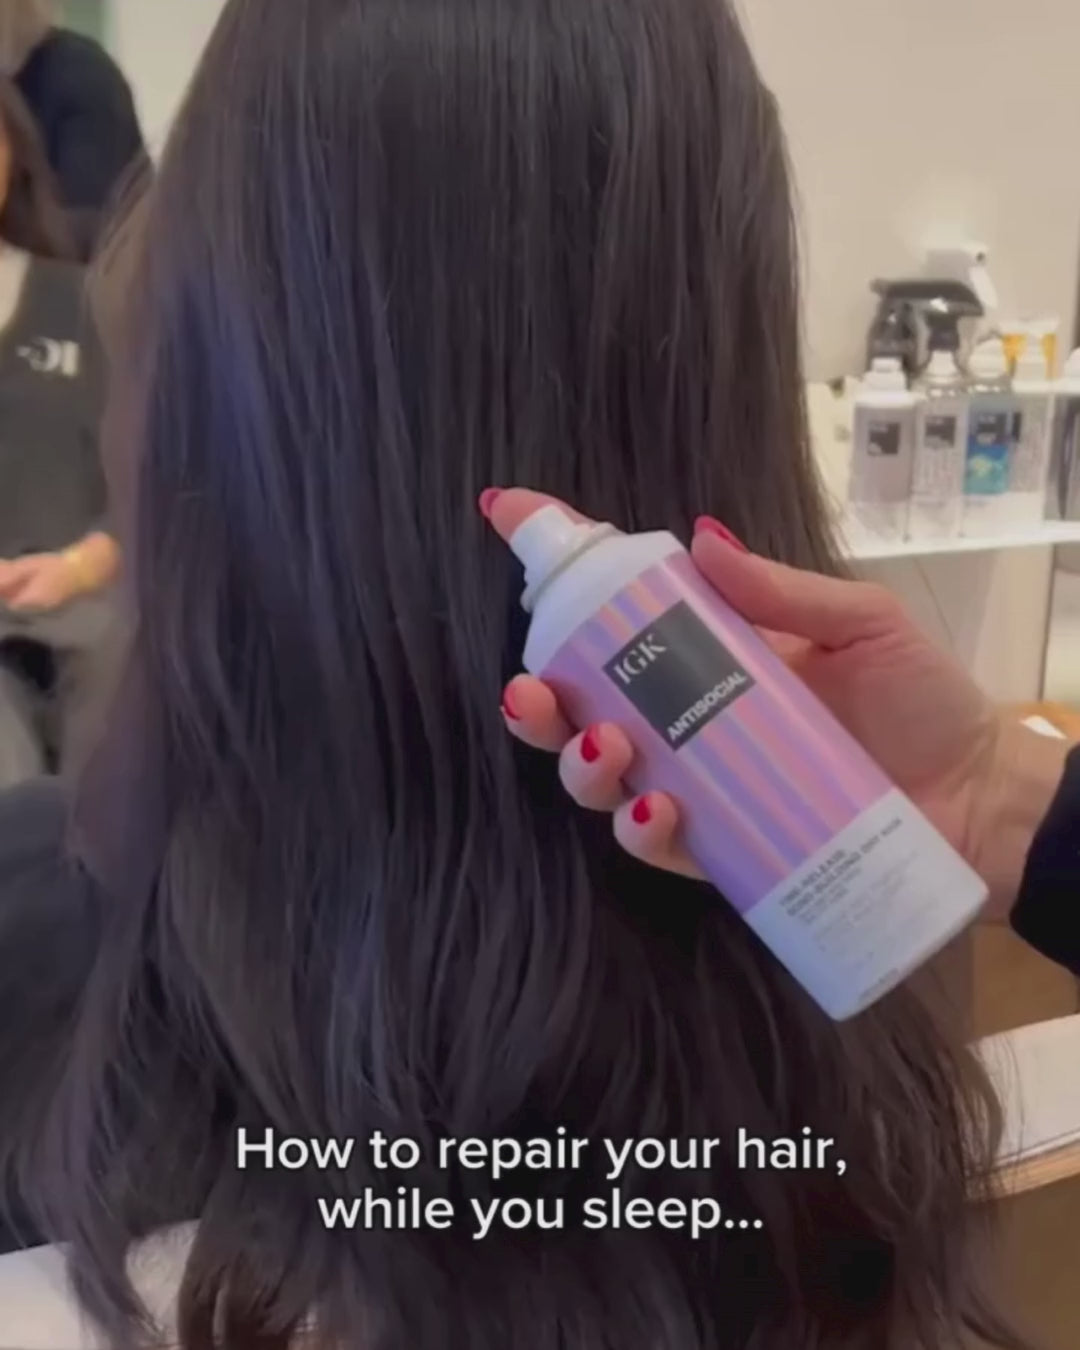 a person spraying hair product